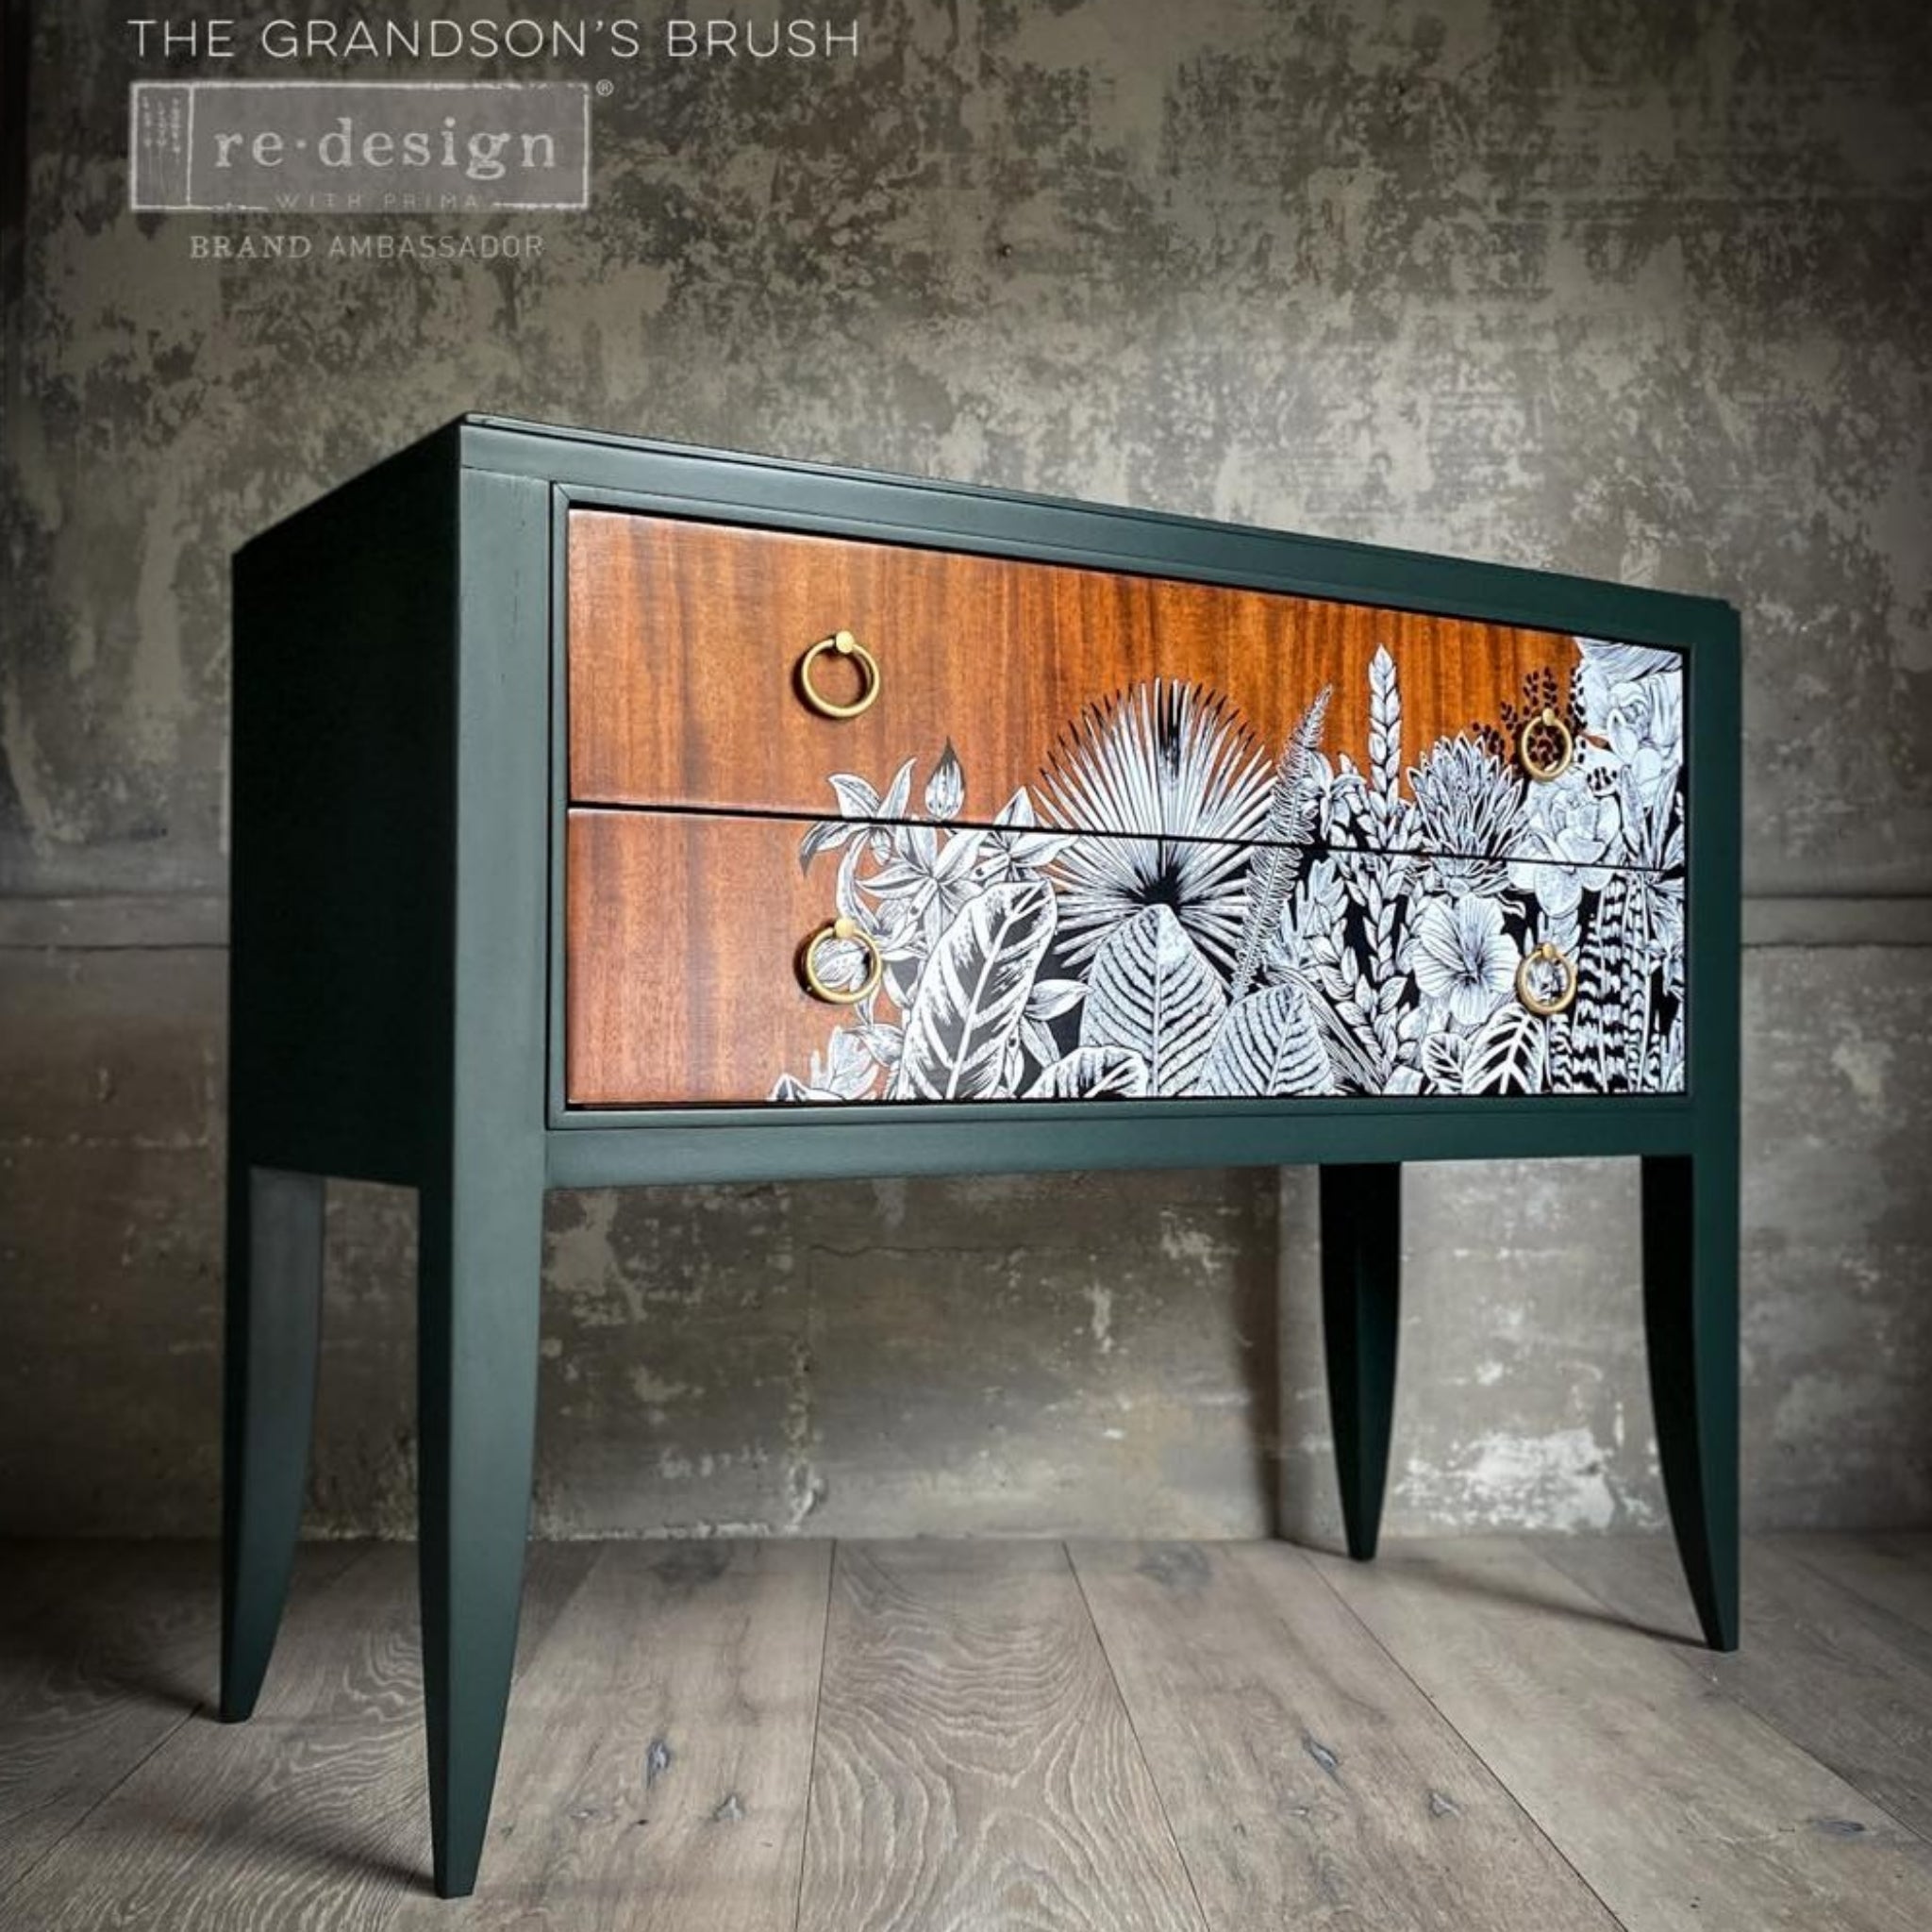 A modern 2-drawer nightstand refurbished by The Grandson's Brush is painted dark green and features ReDesign with Prima's Abstract Jungle transfer on its drawers over natural wood.